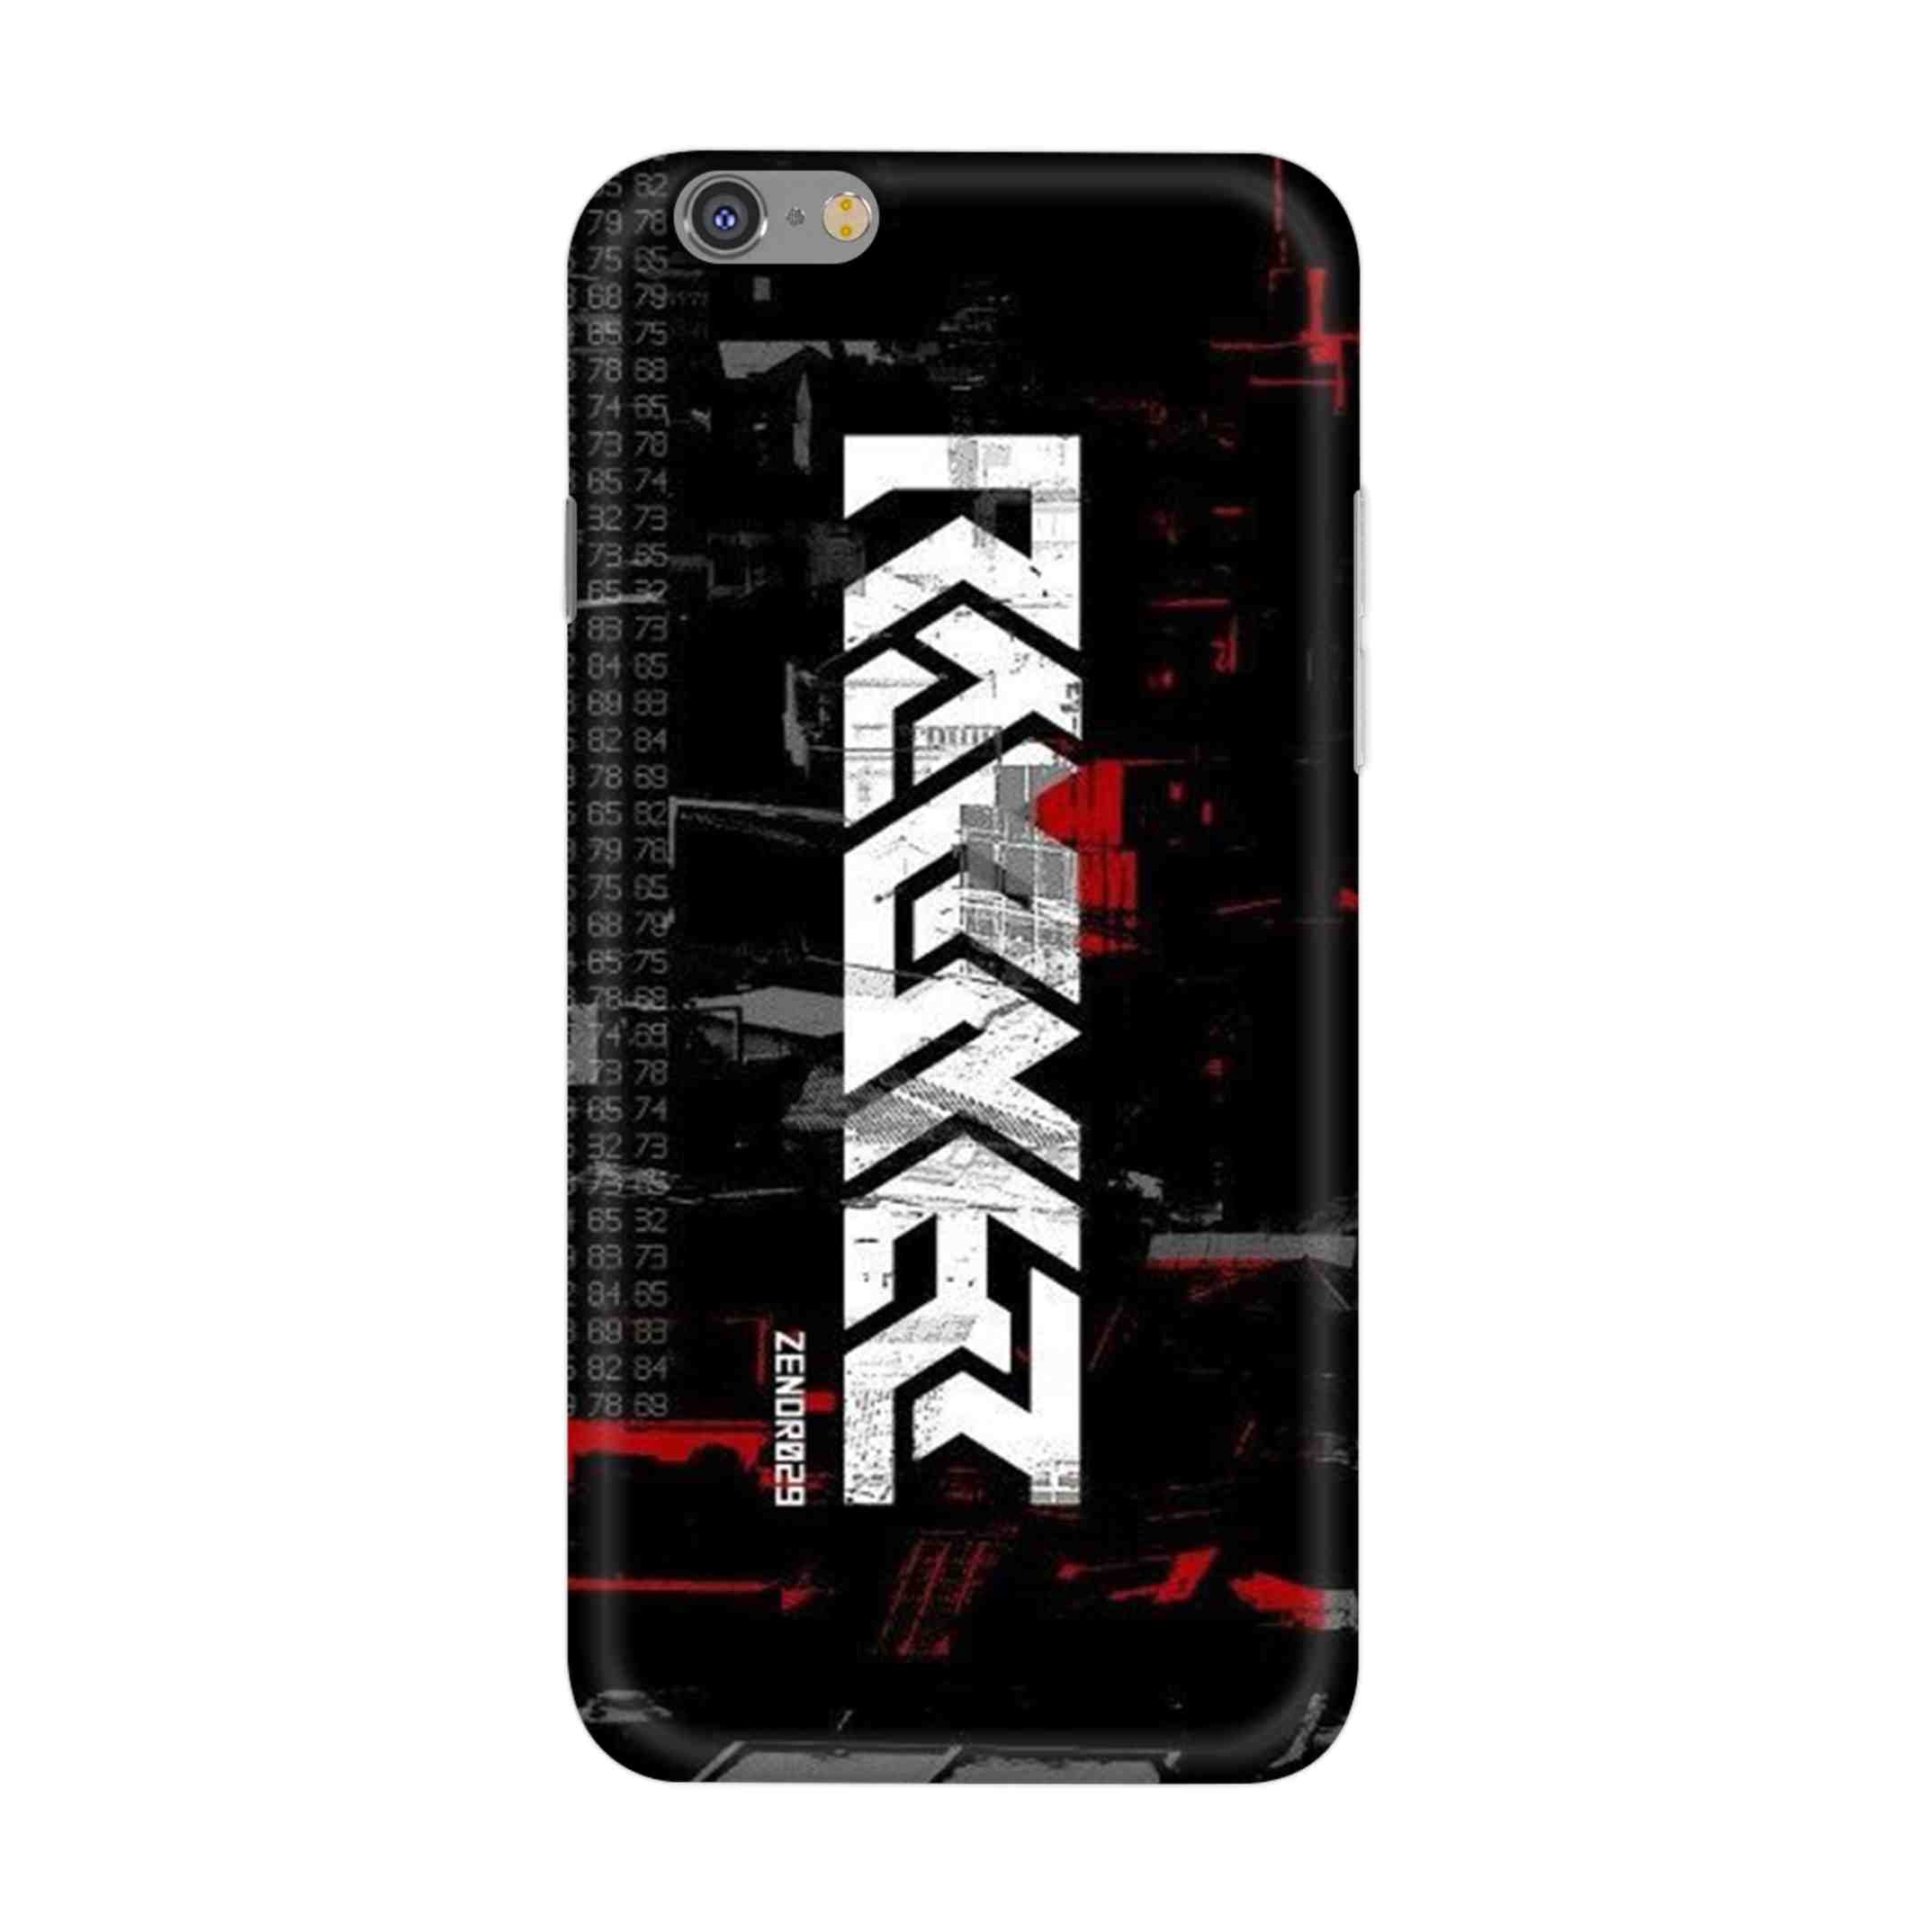 Buy Raxer Hard Back Mobile Phone Case/Cover For iPhone 6 / 6s Online